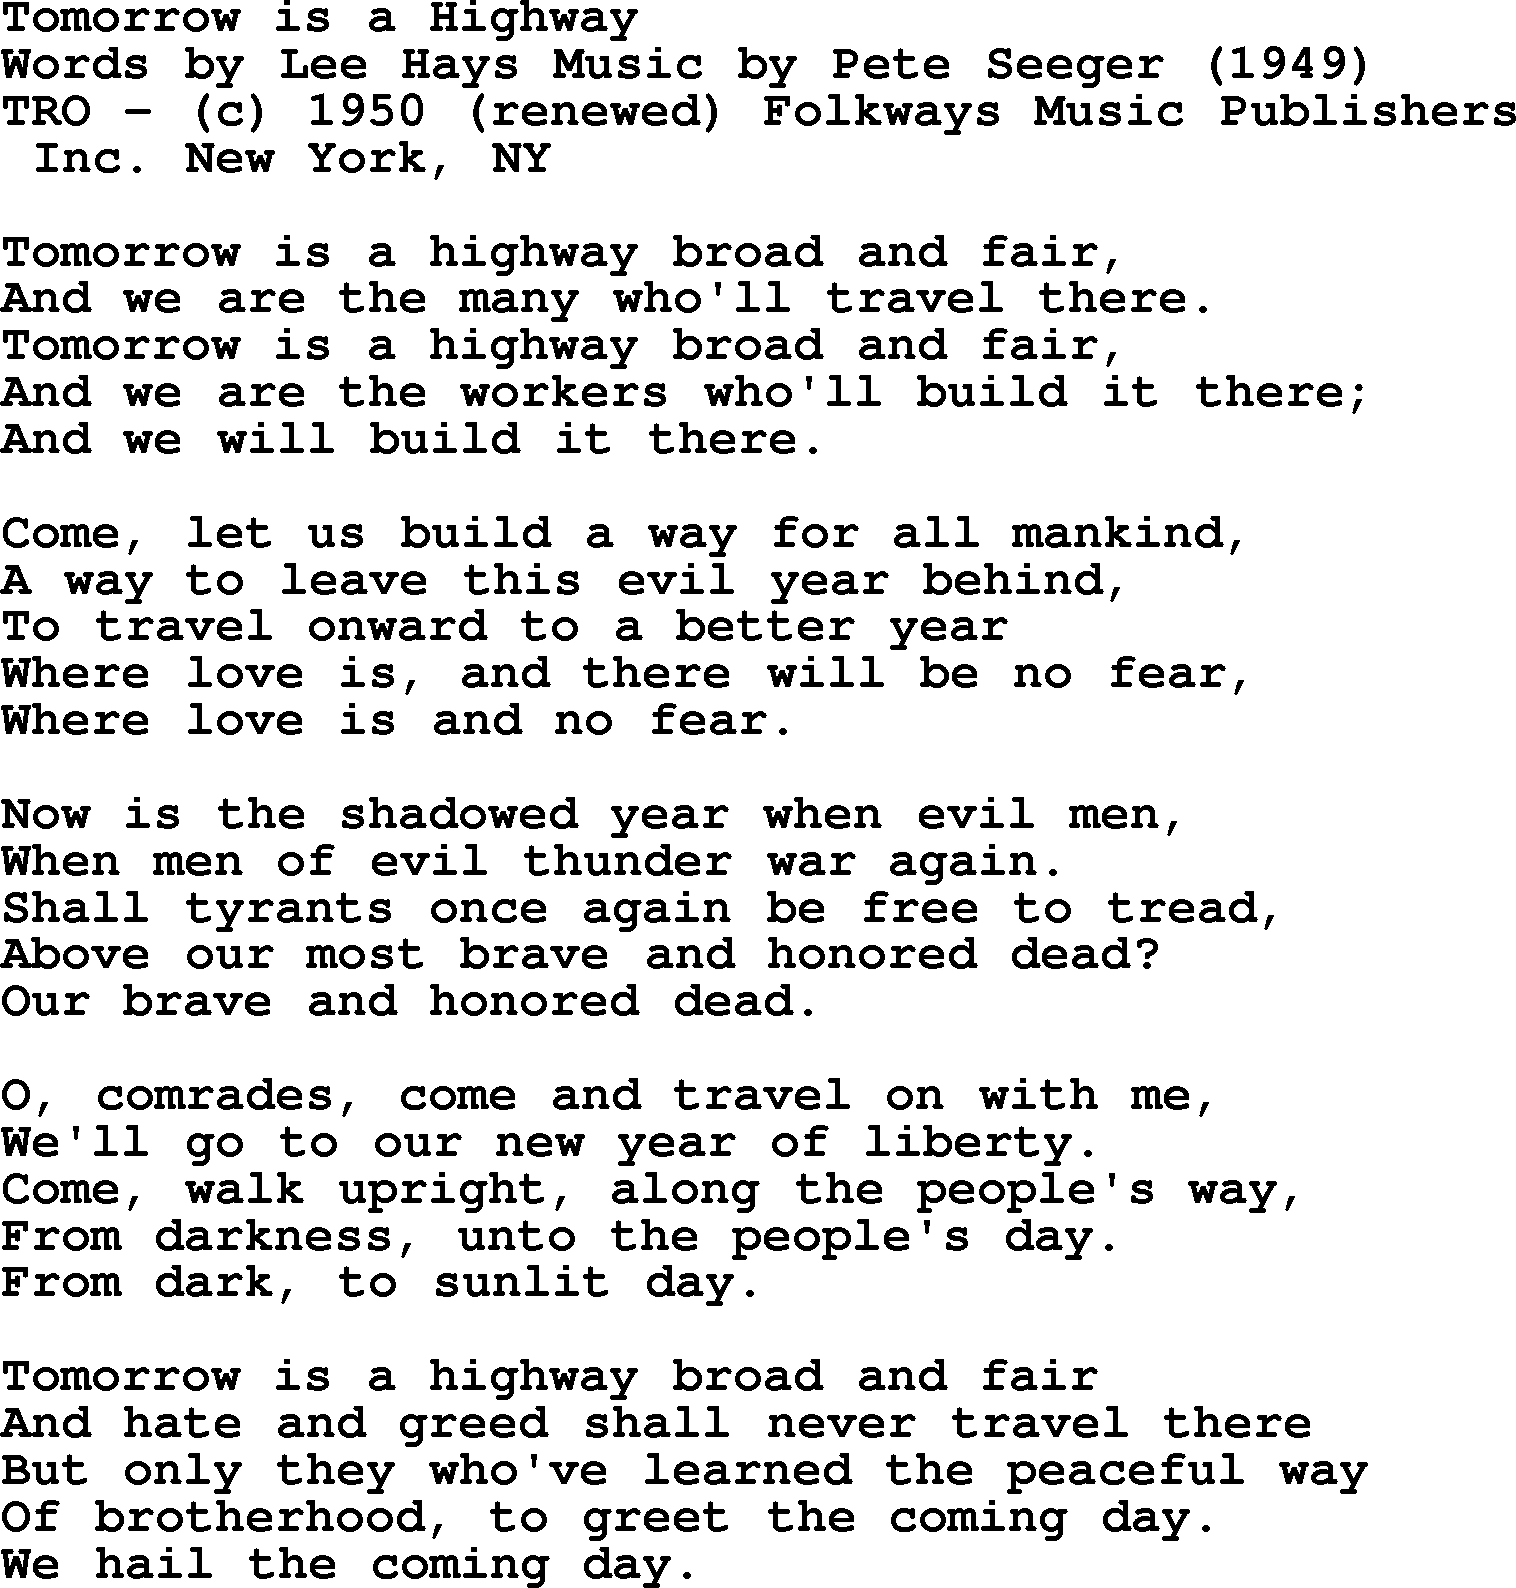 Pete Seeger song Tomorrow is a Highway-Pete-Seeger.txt lyrics